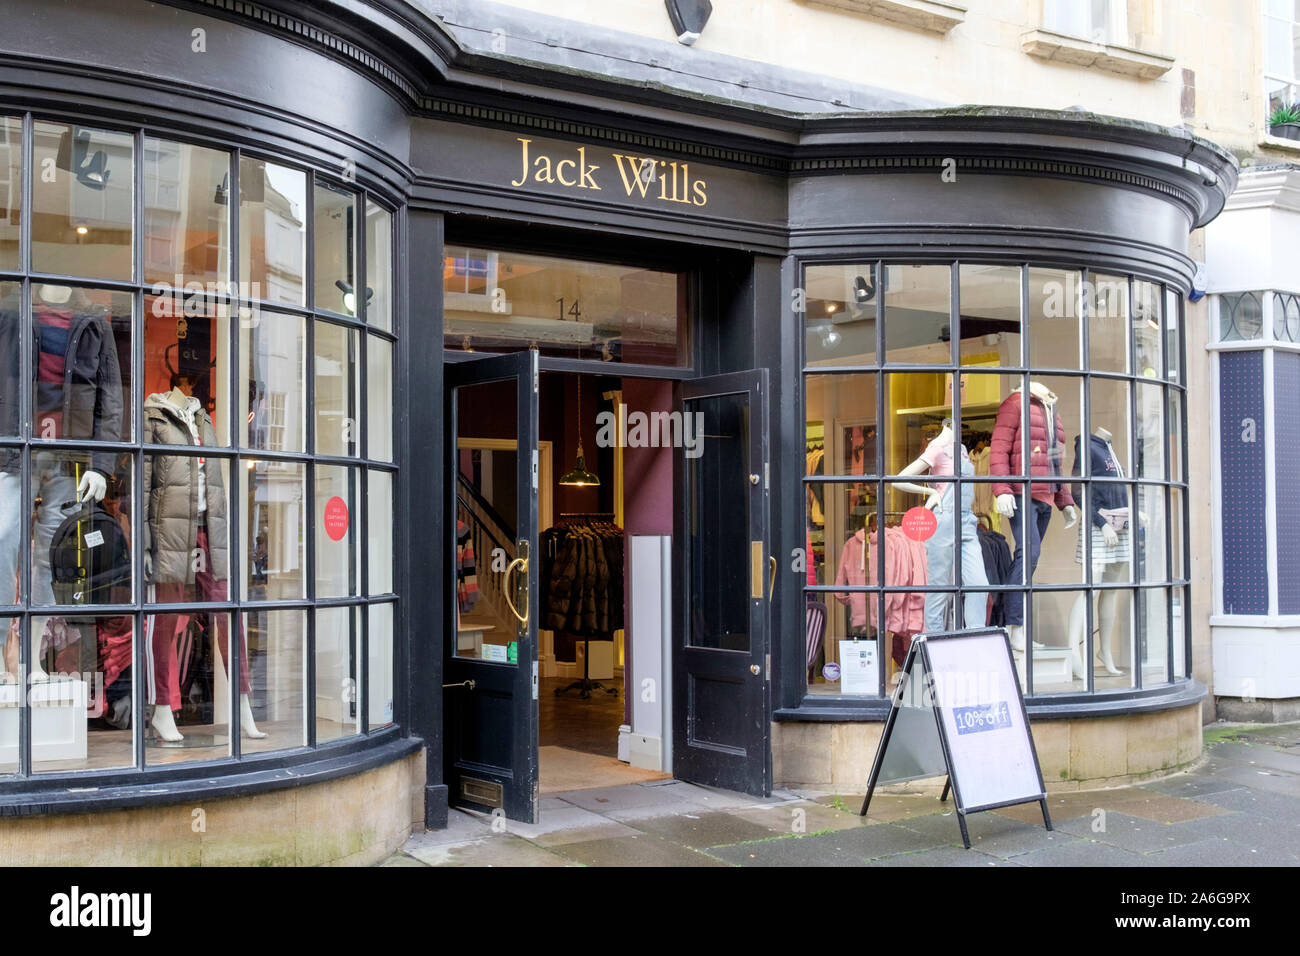 Jack Wills And Shop High Resolution Stock Photography and Images - Alamy